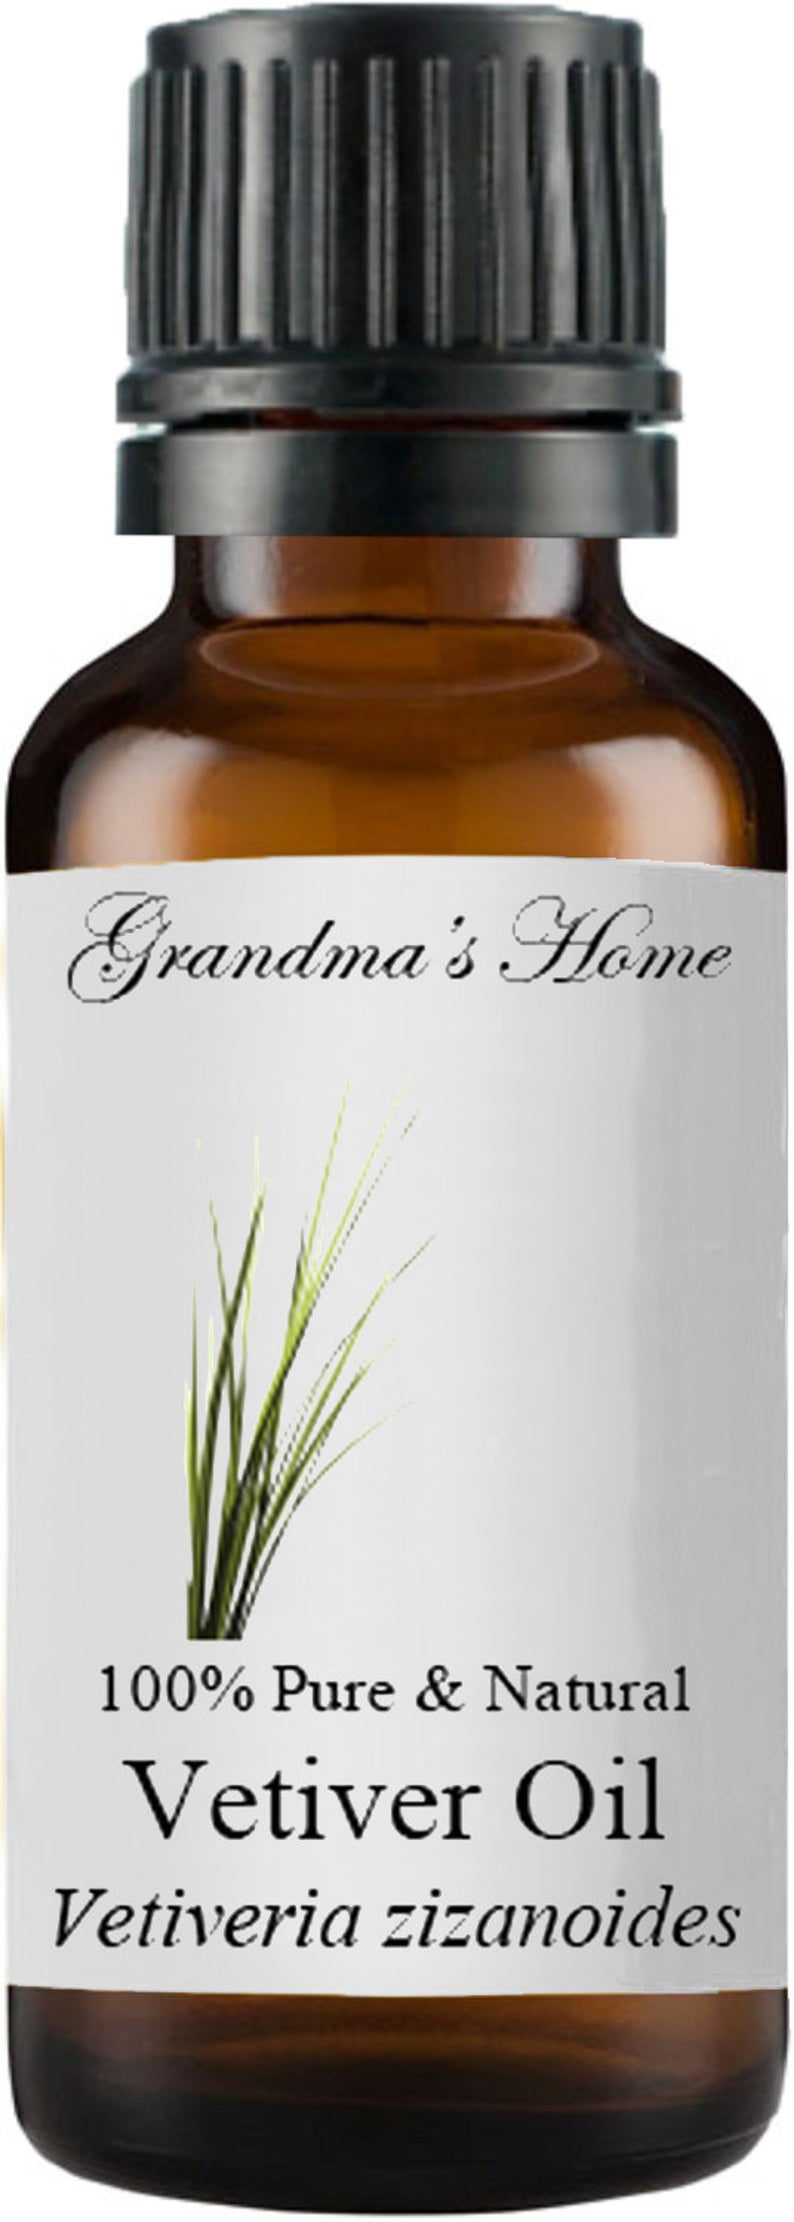 Vetiver Oil  5mL Grandma’s Home 100% Pure and Natural